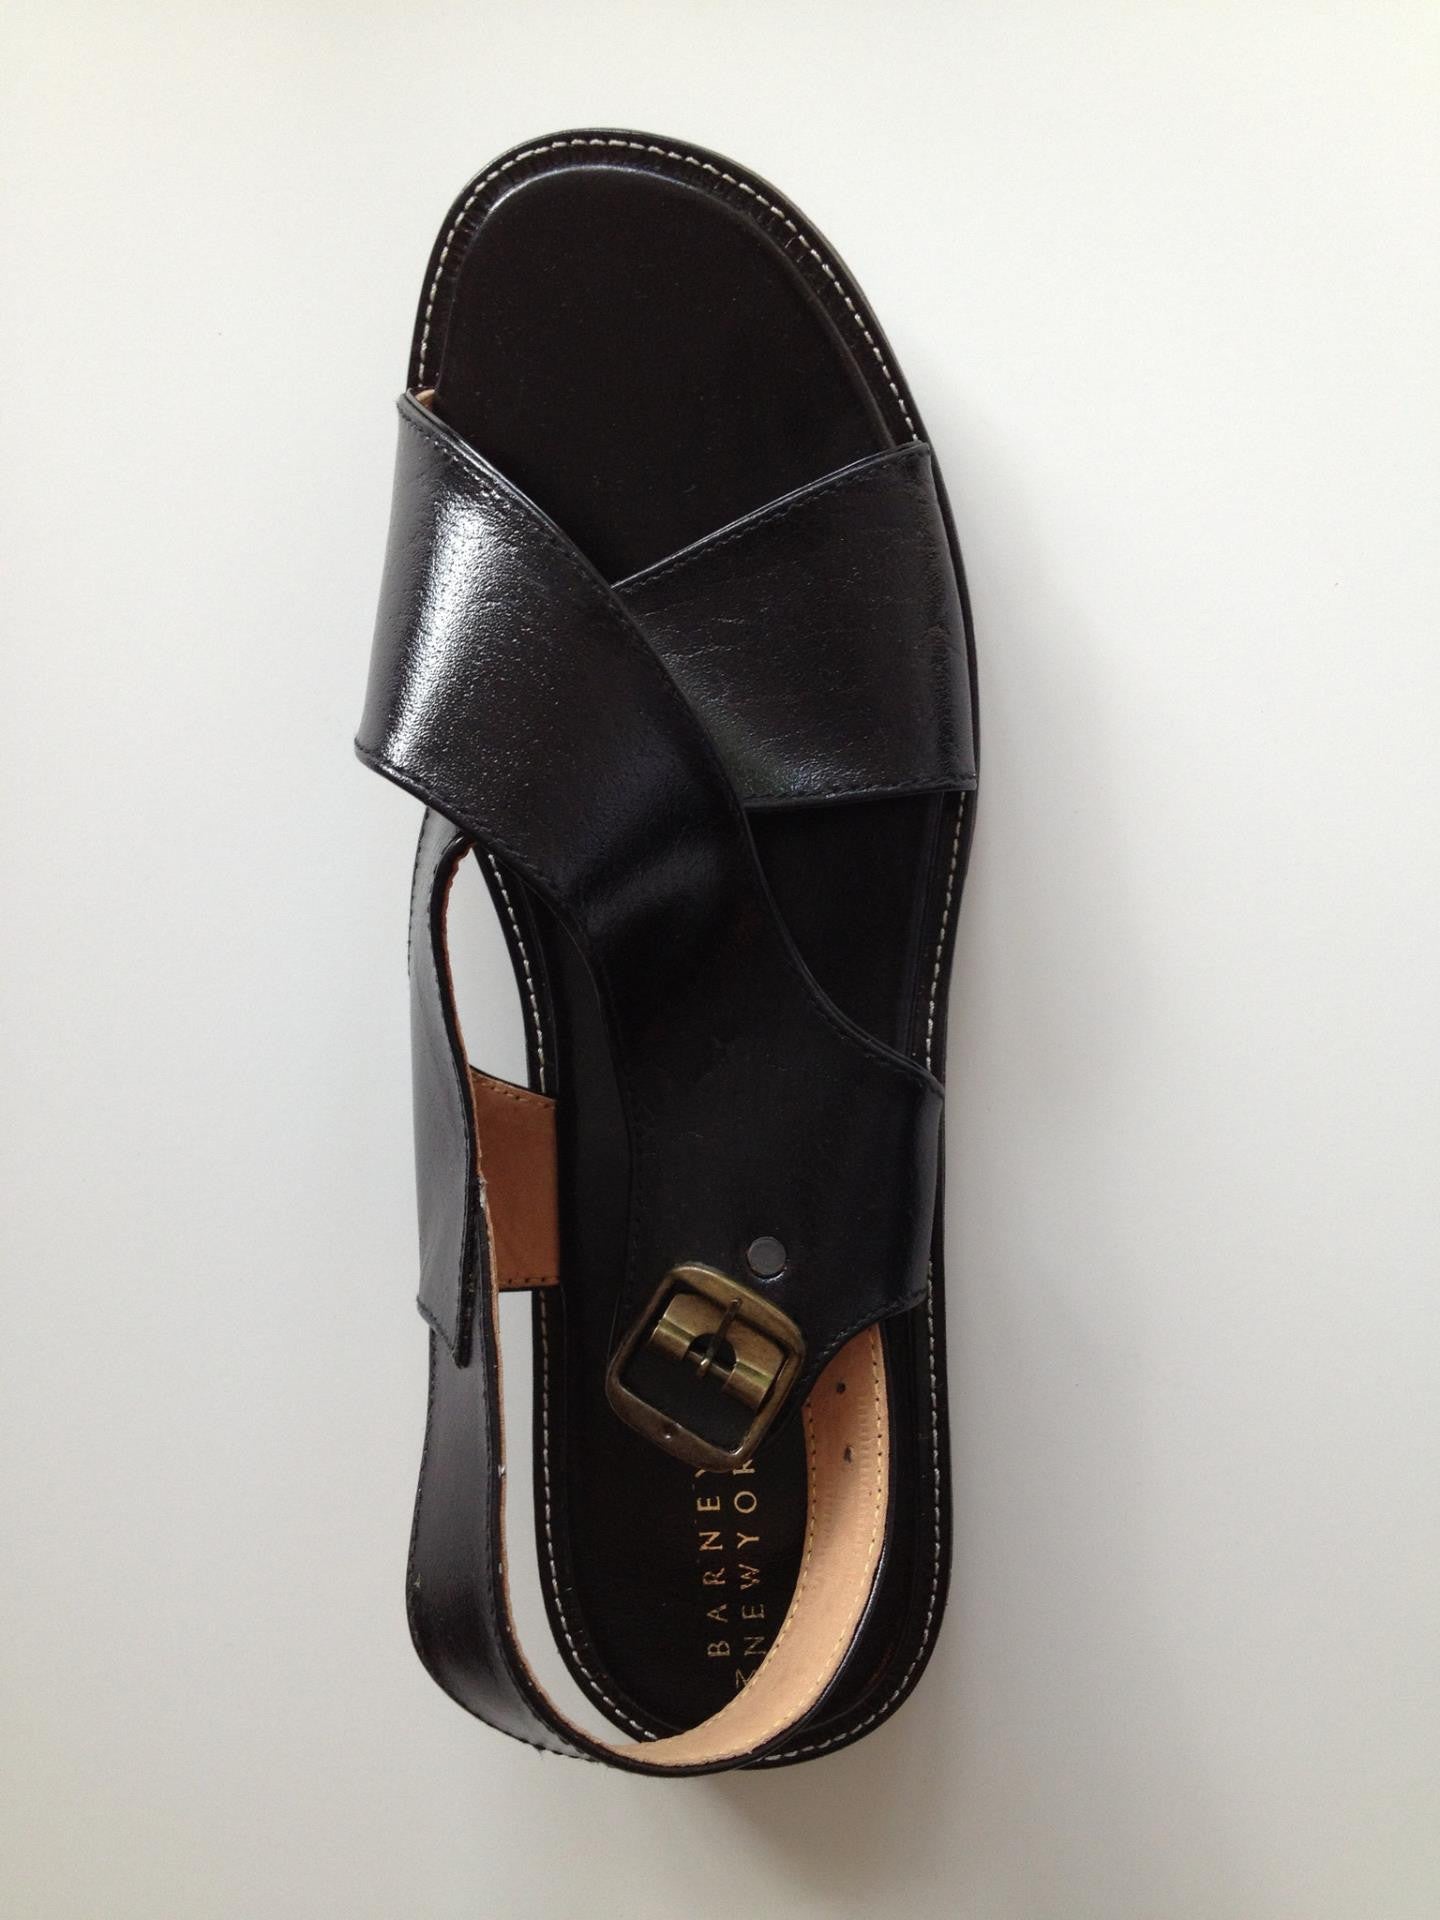 Barneys New York Leather Sandals - but 